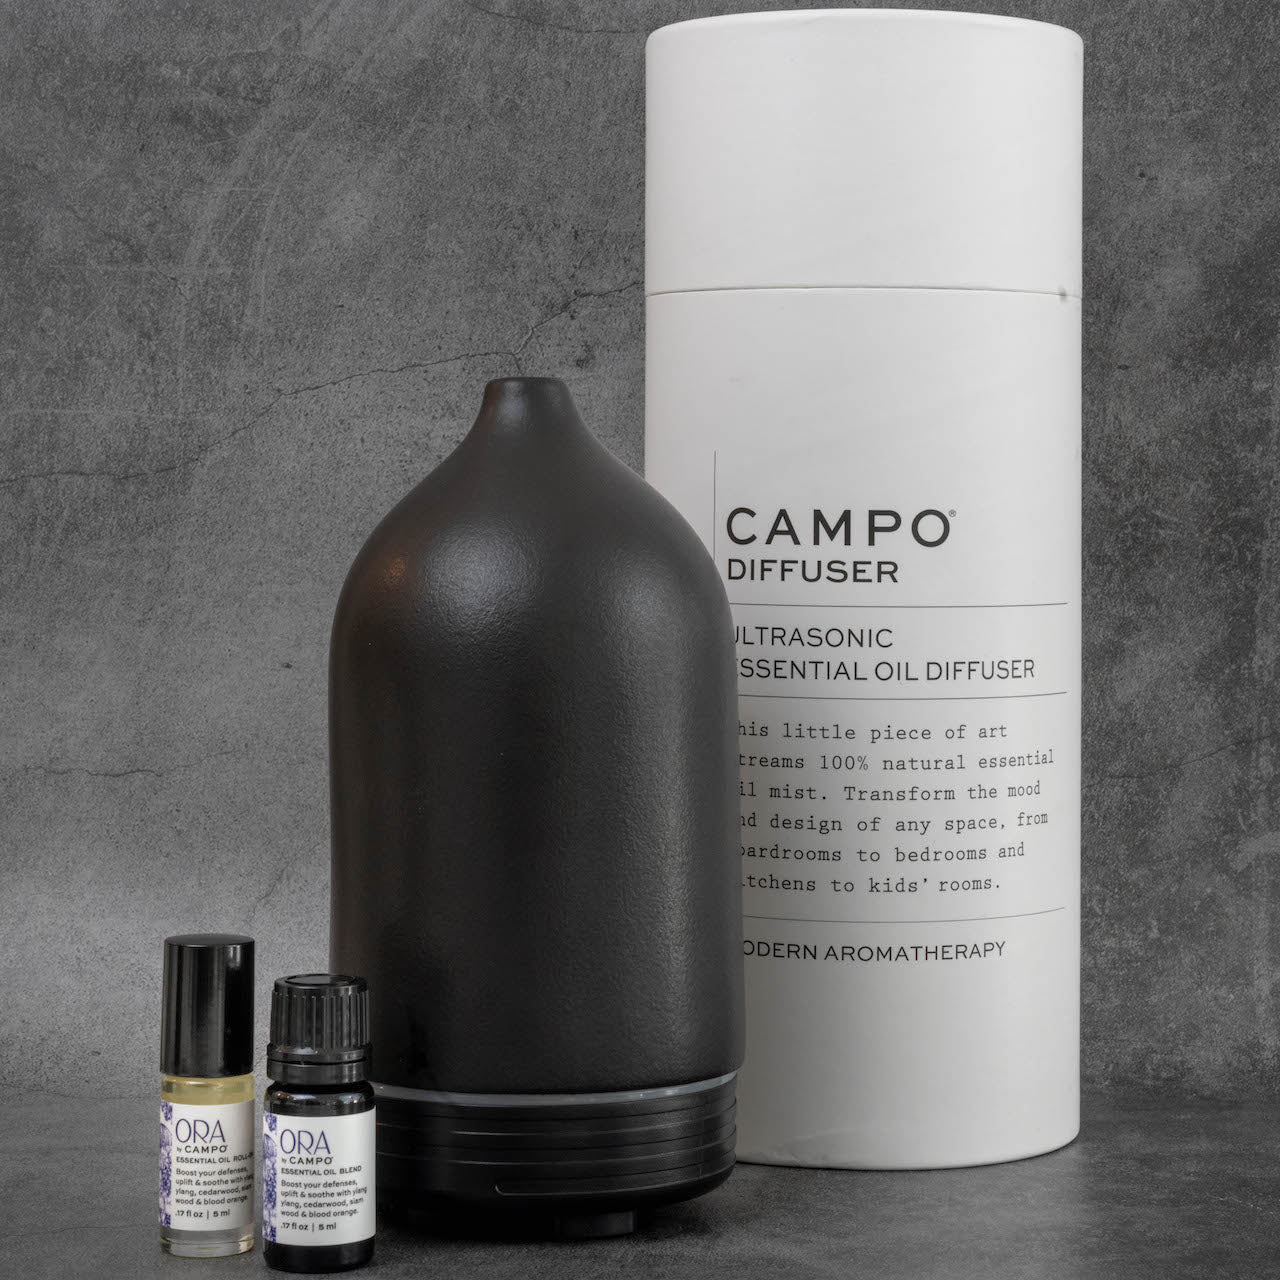 The same black diffuser as in the previous picture, with a set of ORA by Campo essential oils next to it. Behind the diffuser is the packaging for the diffuser, a tall white cylinder reading "Campo Diffuser, Ultrasonic Essential Oil Diffuser".